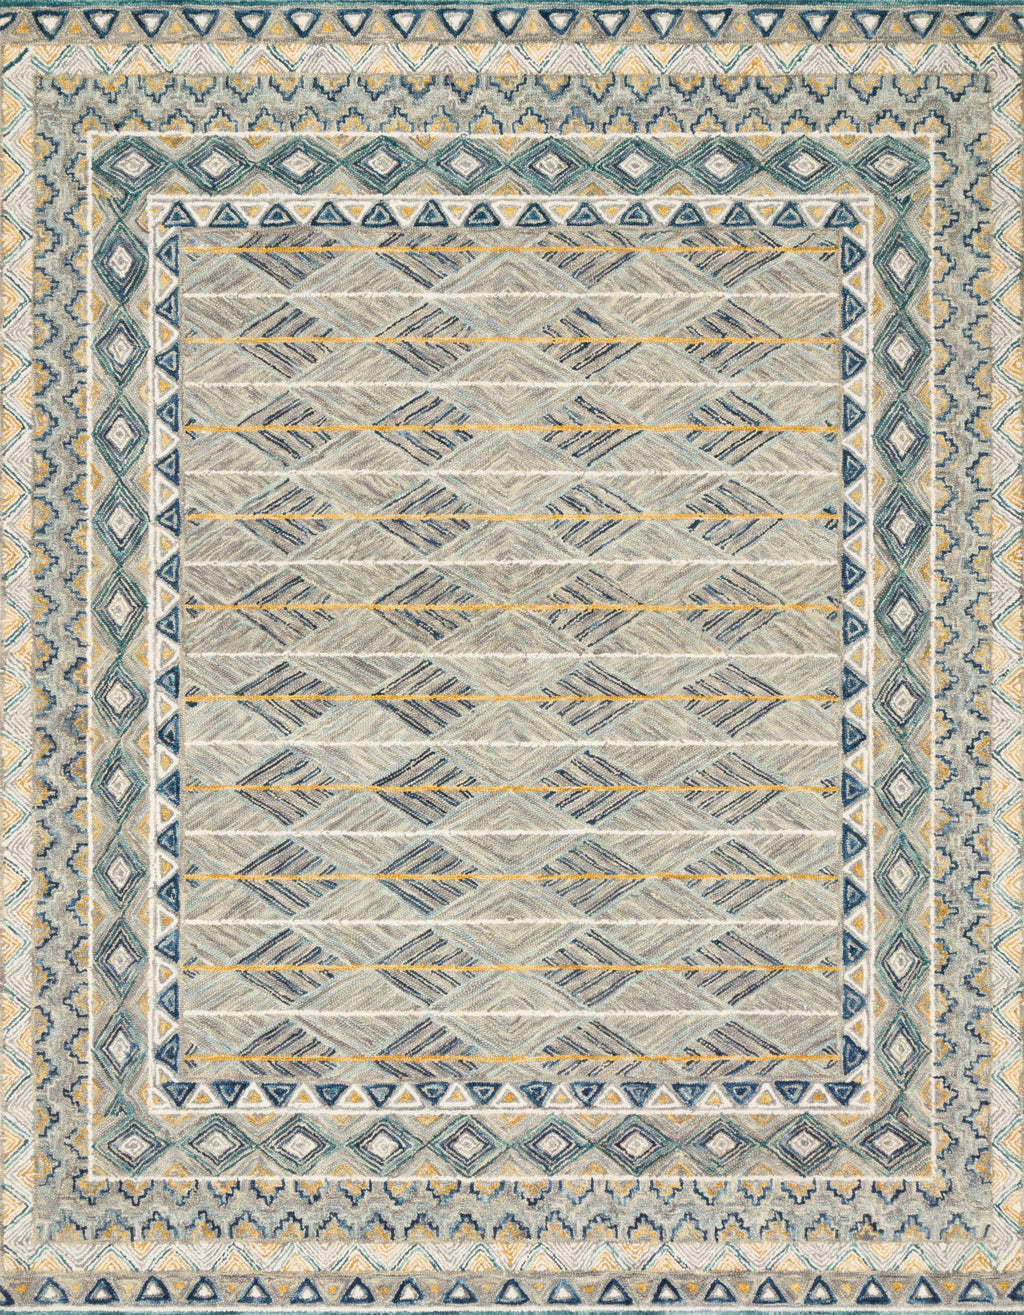 PRITI Collection Wool Rug  in  GREY / LAGOON Gray Accent Hand-Hooked Wool